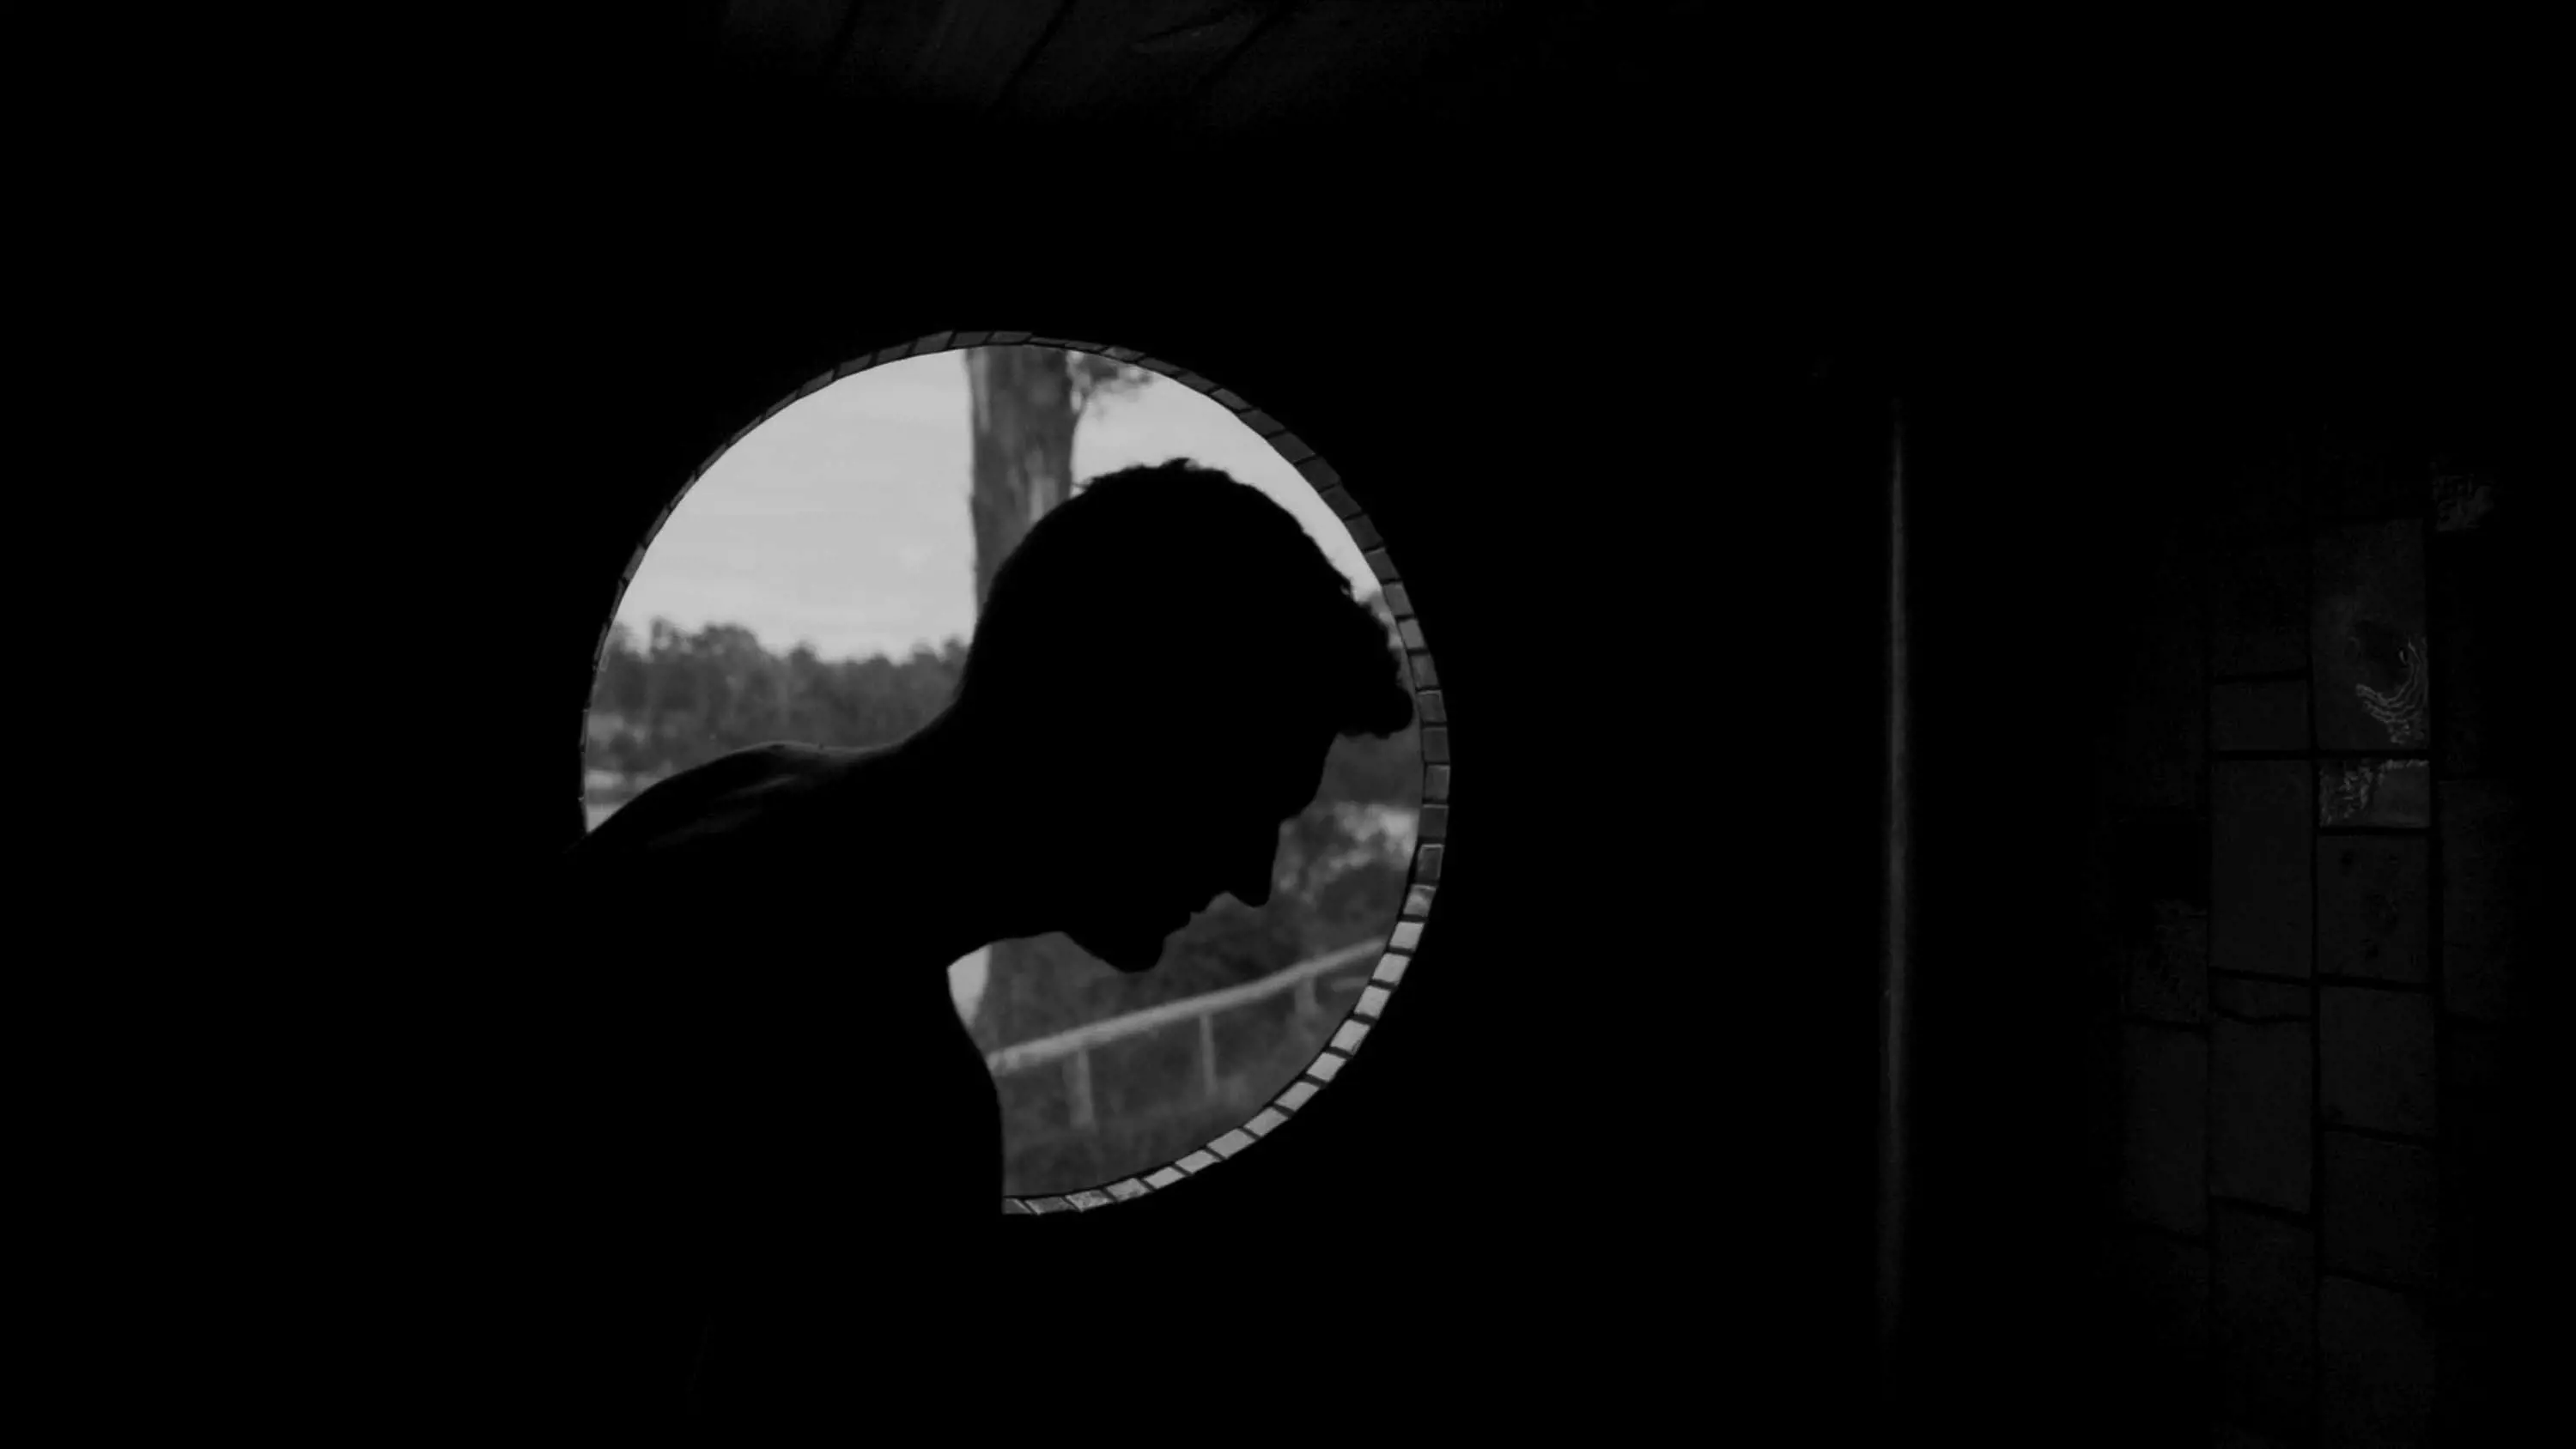 A man's profile silhouette is seen in the backlight from a circular portal window inside a sauna.